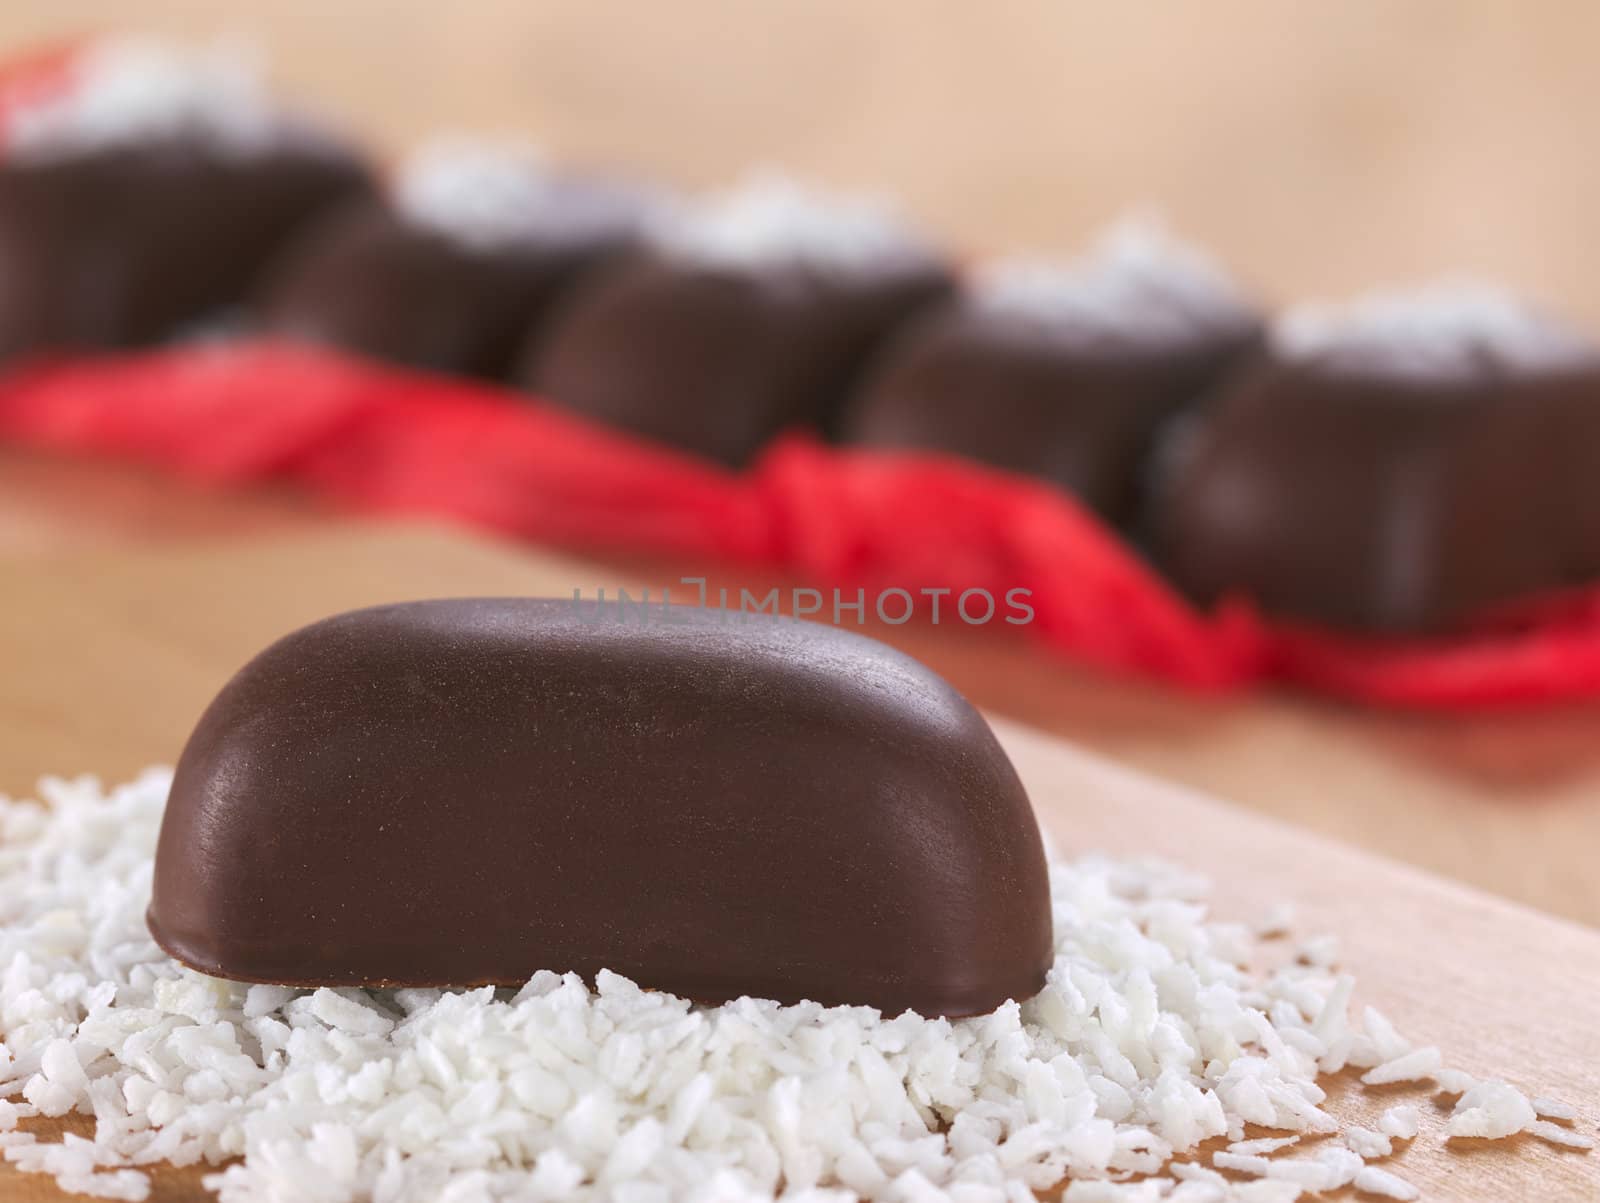 Chocolate candy on grated coconut with other chocolate candies in the back (Selective Focus, Focus on the front of the candy) 